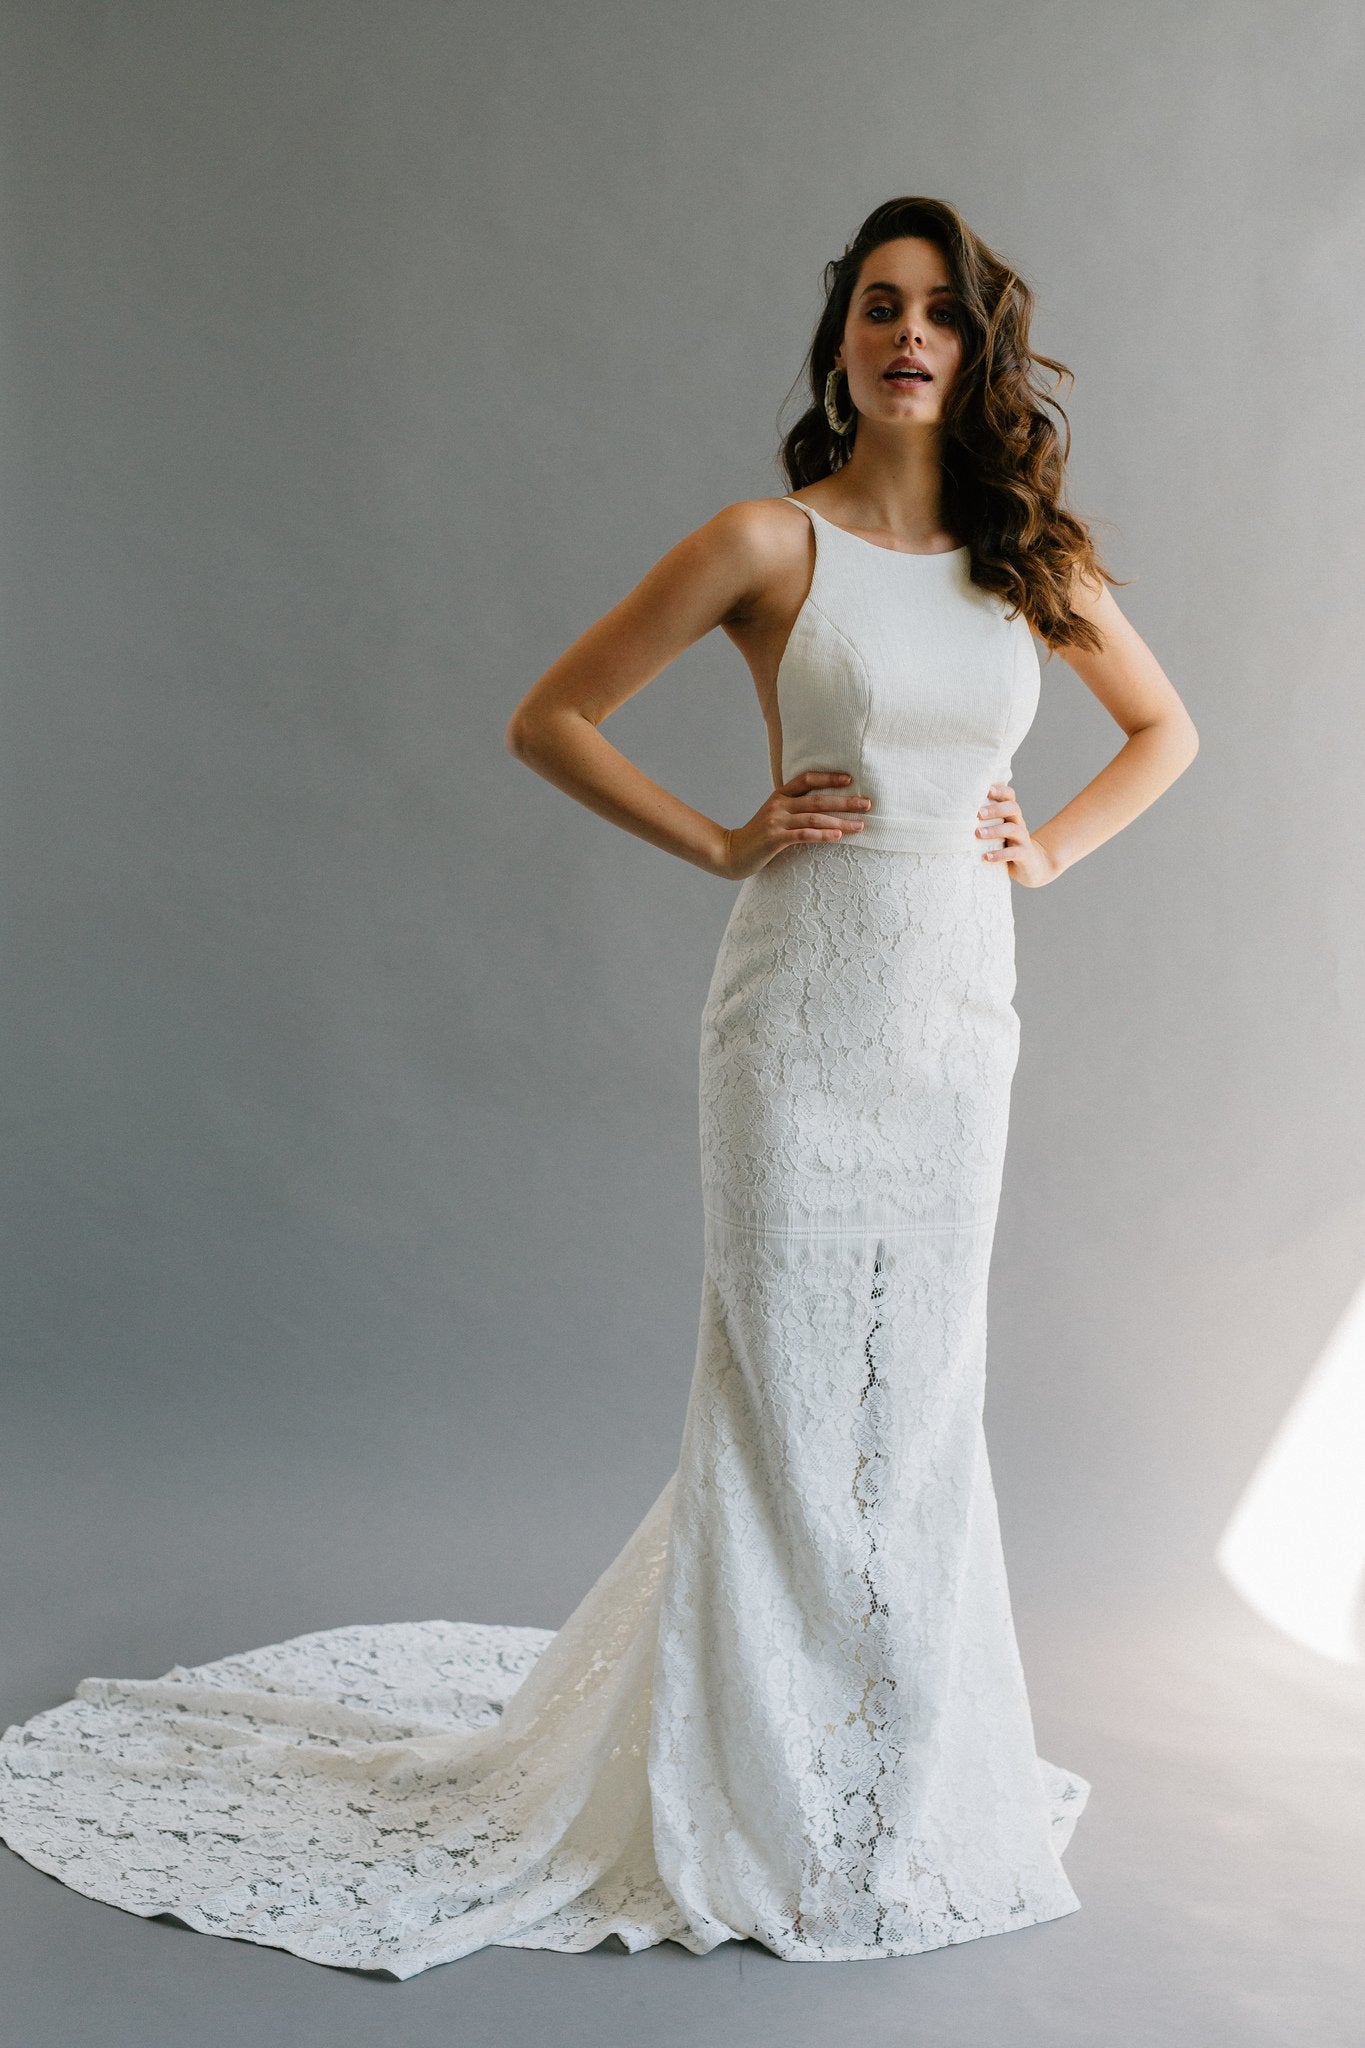 A modern fitted wedding dress with a high neck, low back, and hidden slit in the lace skirt.